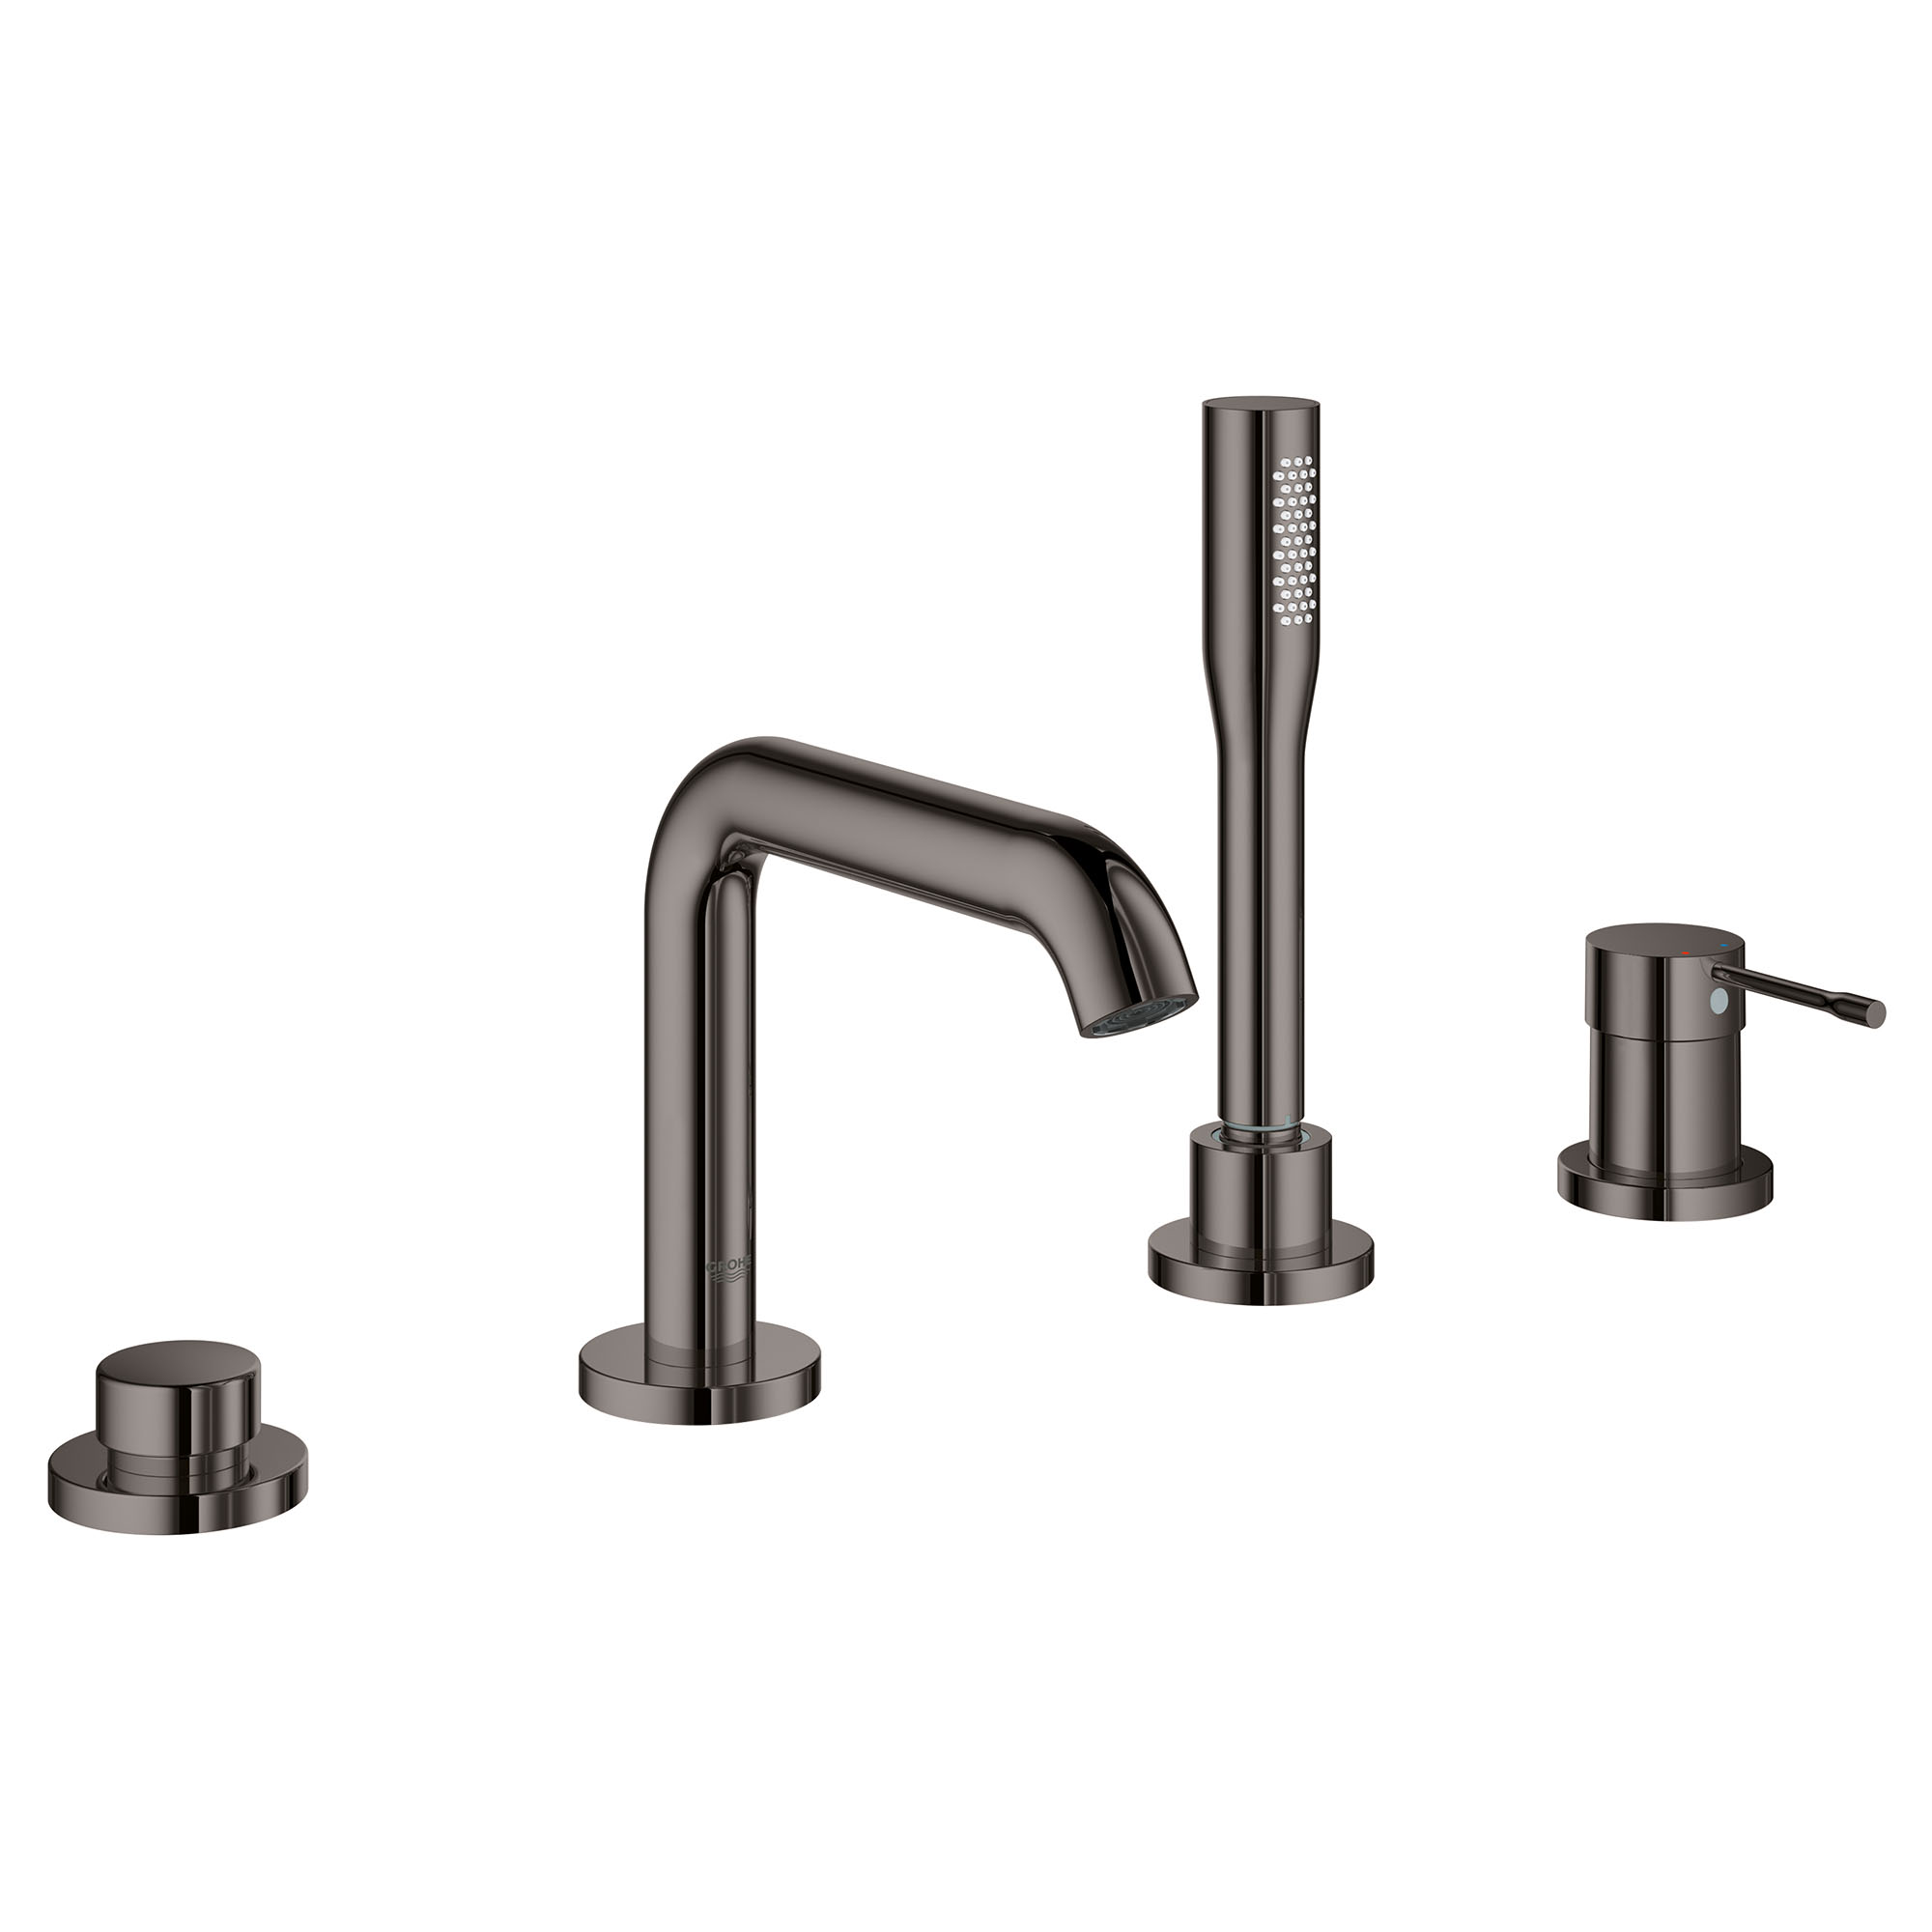 4-Hole Single-Handle Deck Mount Roman Tub Faucet with 1.75 GPM Hand Shower